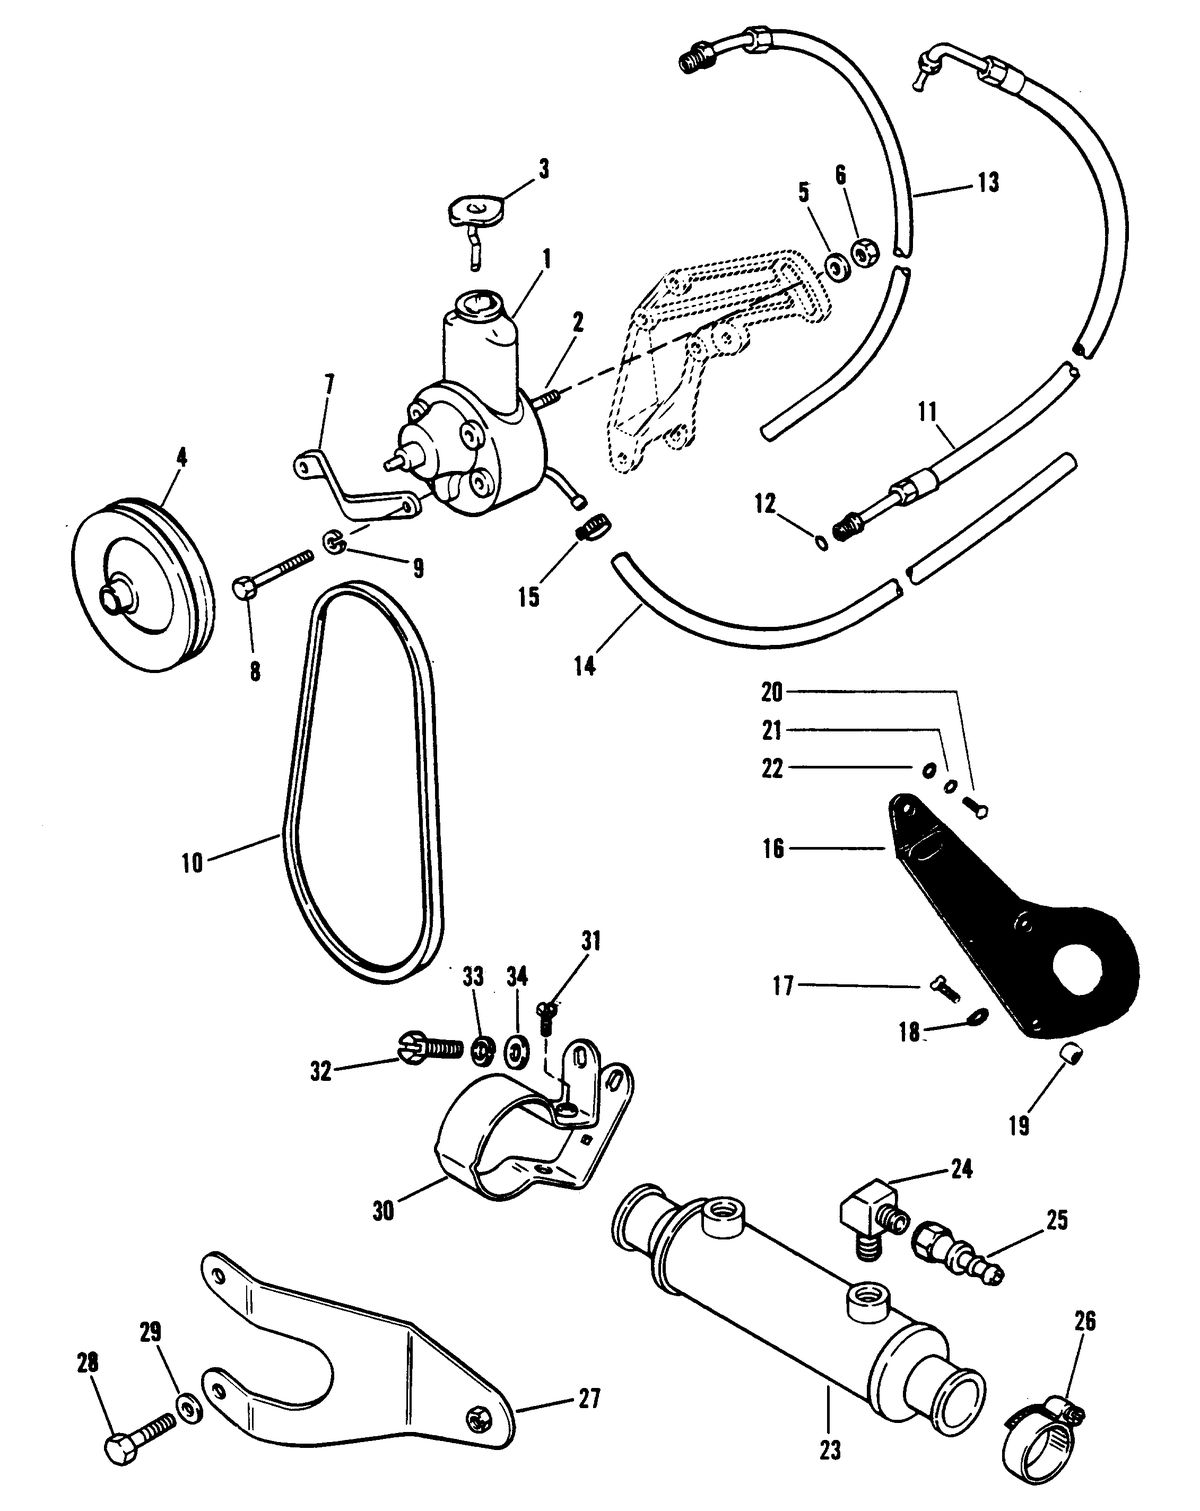 MERCRUISER 575 H.P. ENGINE (CARD 54) POWER STEERING COMPONENTS(M0031-022)